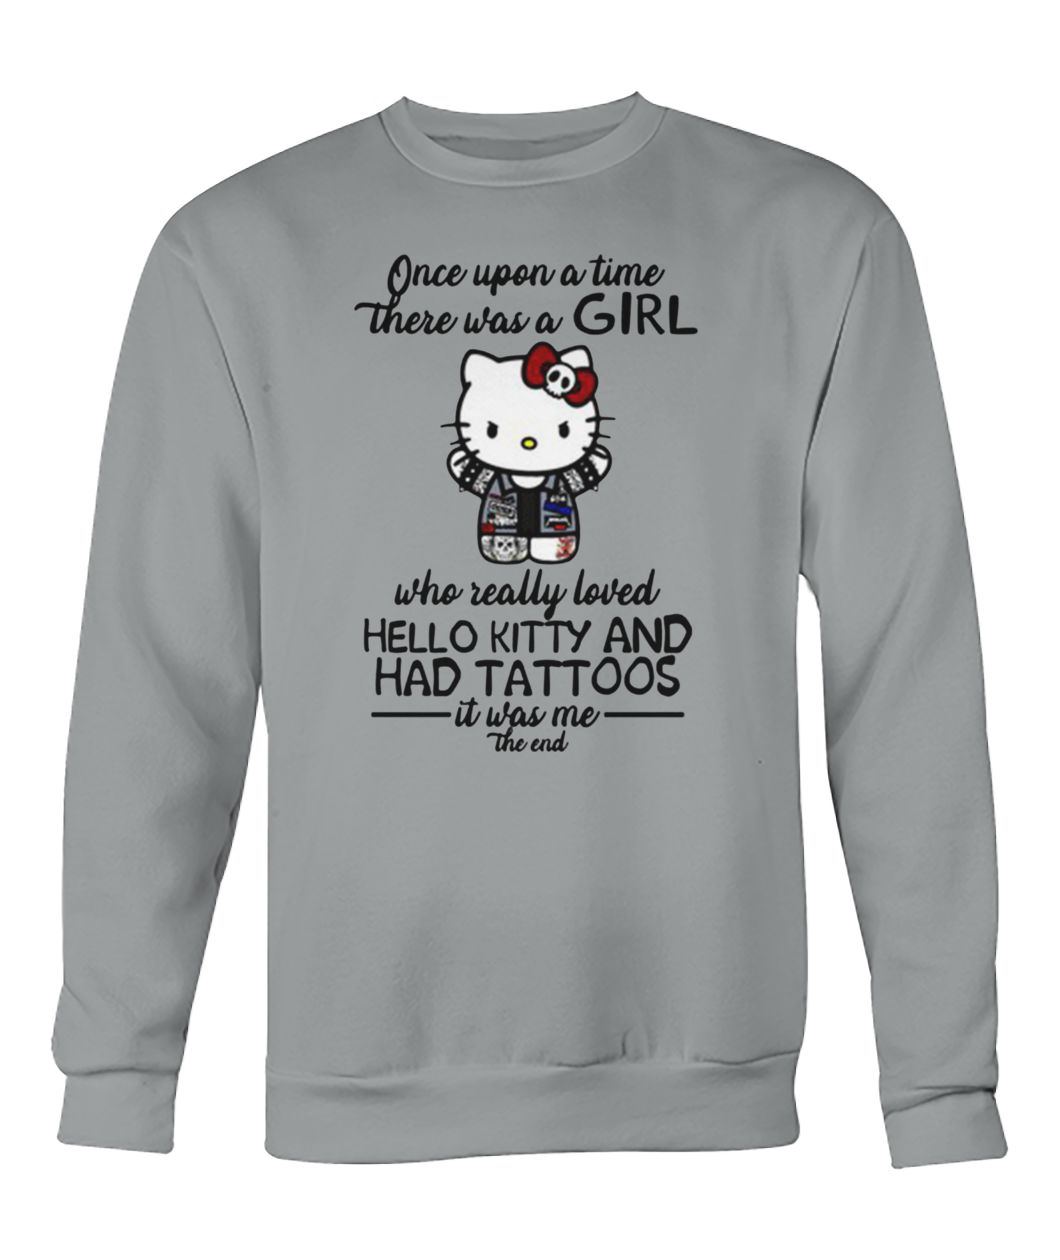 Once upon a time there was a girl who really loved hello kitty and had tattoos it was me crew neck sweatshirt